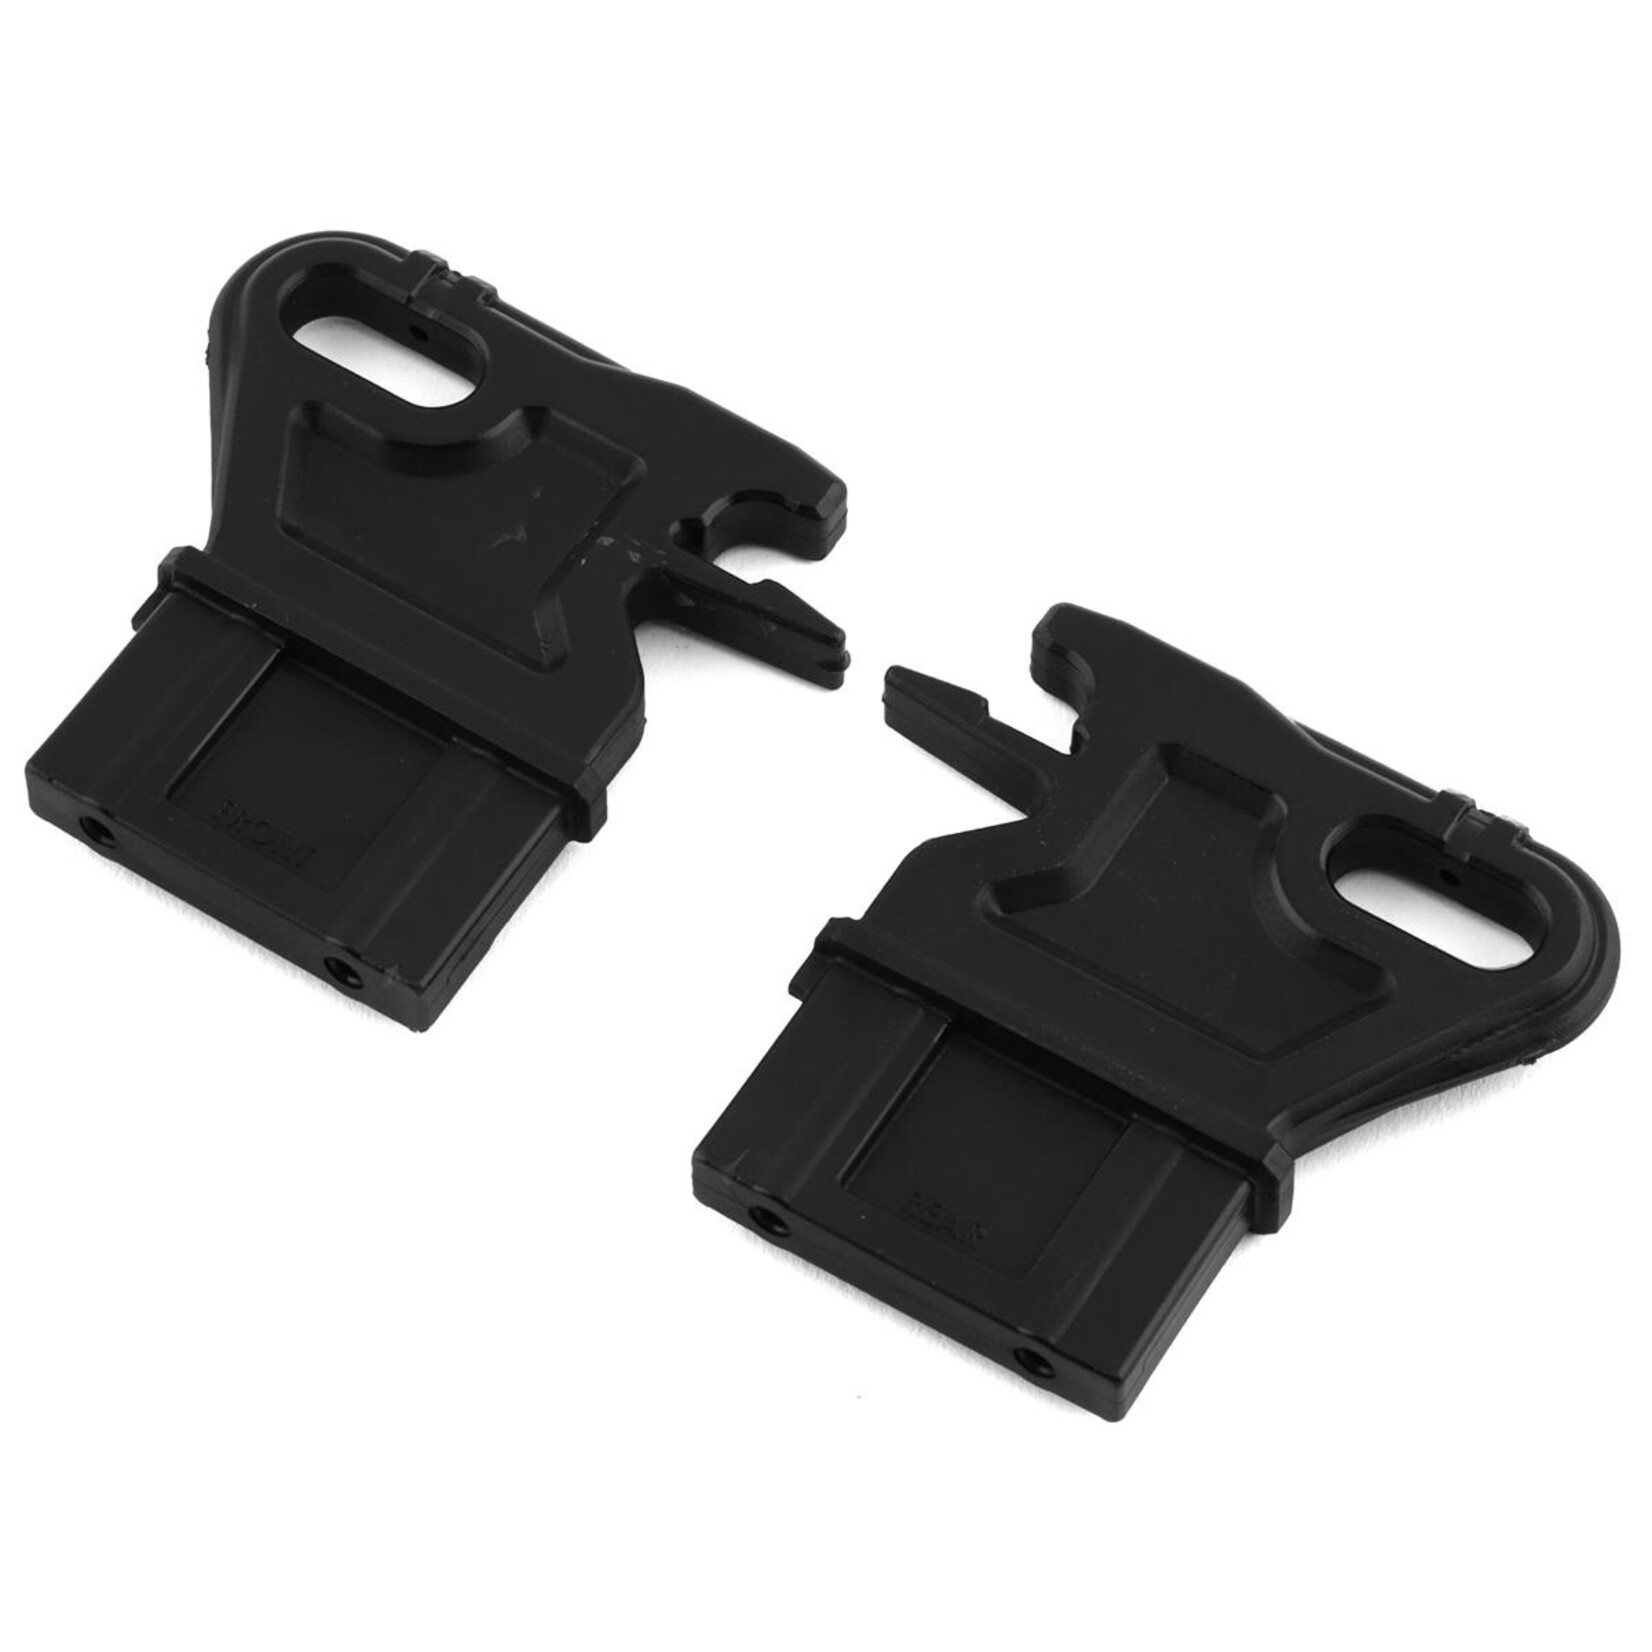 Traxxas Traxxas Sledge Battery Retainer Hold-Downs (2) #9628